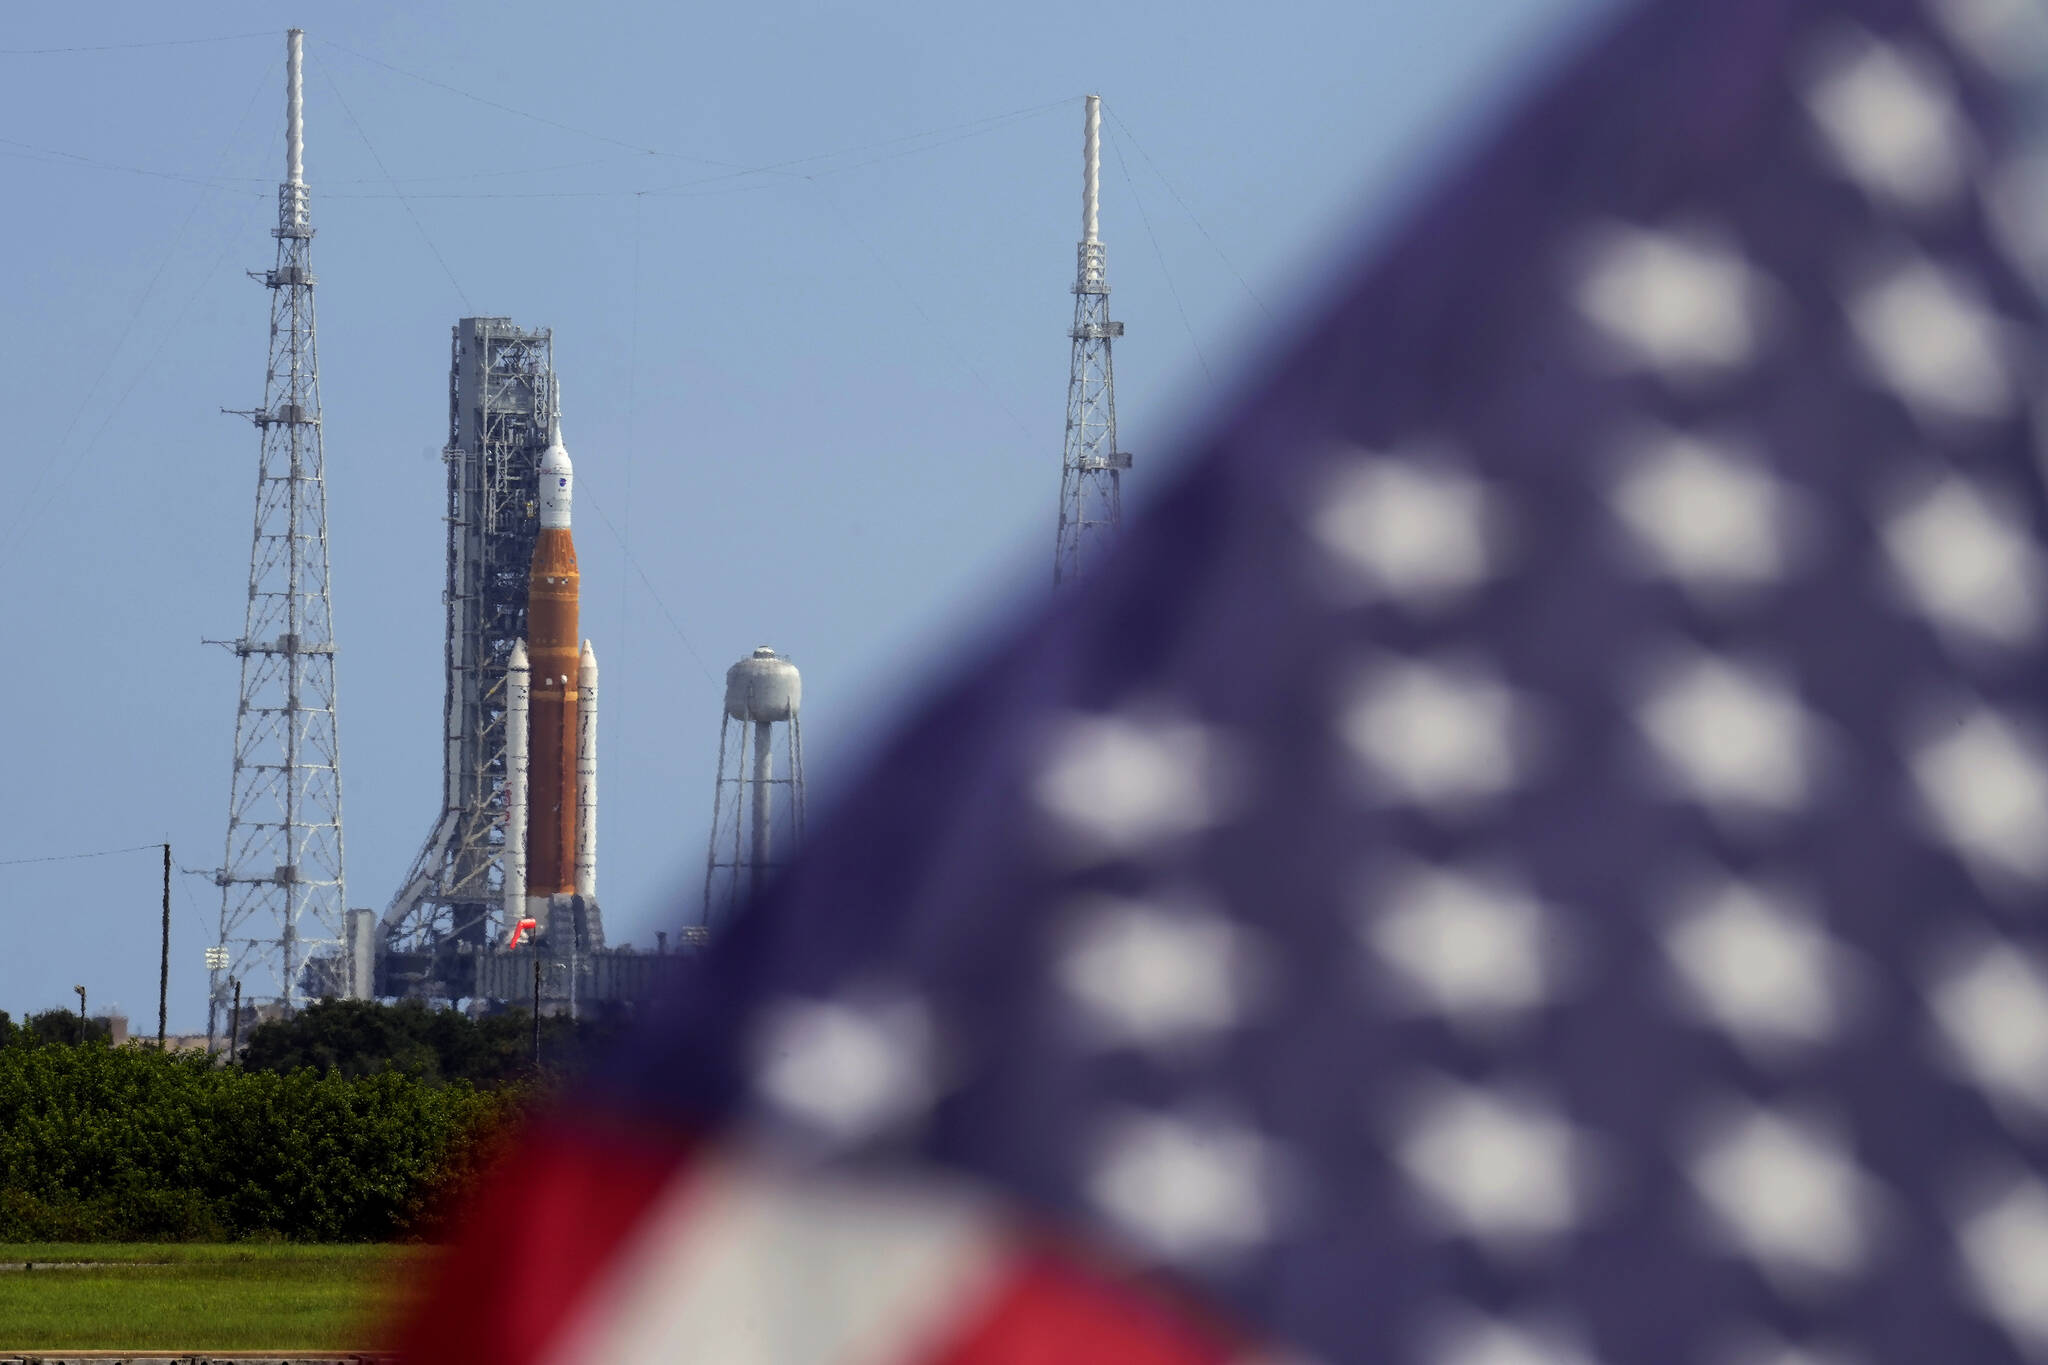 An American flag flies in the breeze as NASA’s new moon rocket sits on Launch Pad 39-B after being scrubbed at the Kennedy Space Center Saturday, Sept. 3, 2022, in Cape Canaveral, Fla. This is scheduled to be the first flight of NASA’s 21st-century moon-exploration program, named Artemis after Apollo’s mythological twin sister. (AP Photo / Chris O’Meara)